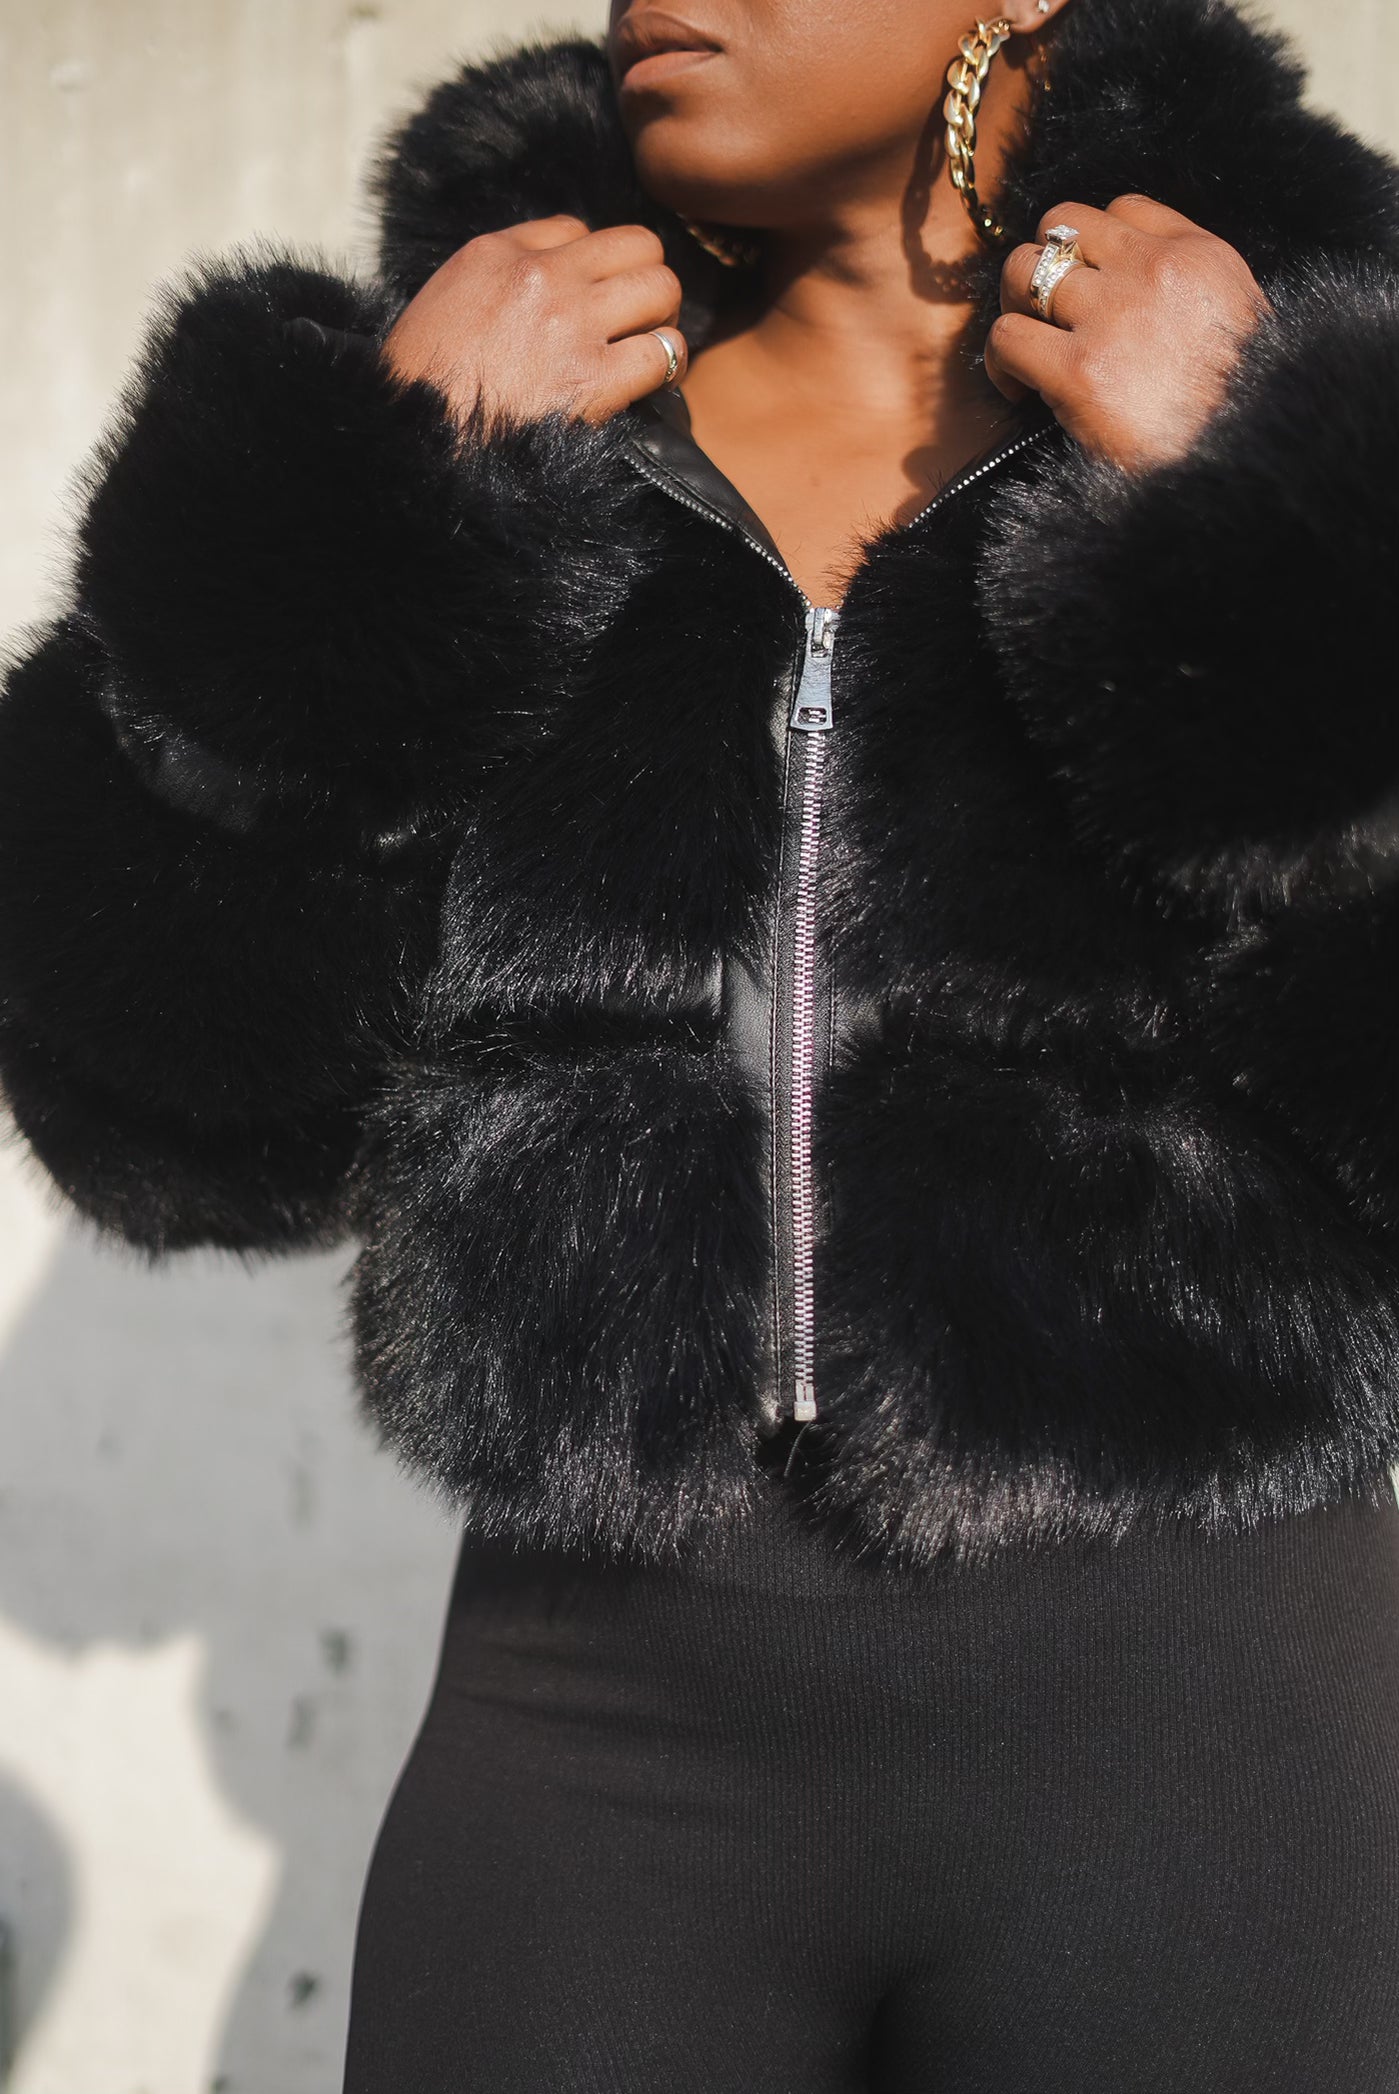 She’s all that faux fur